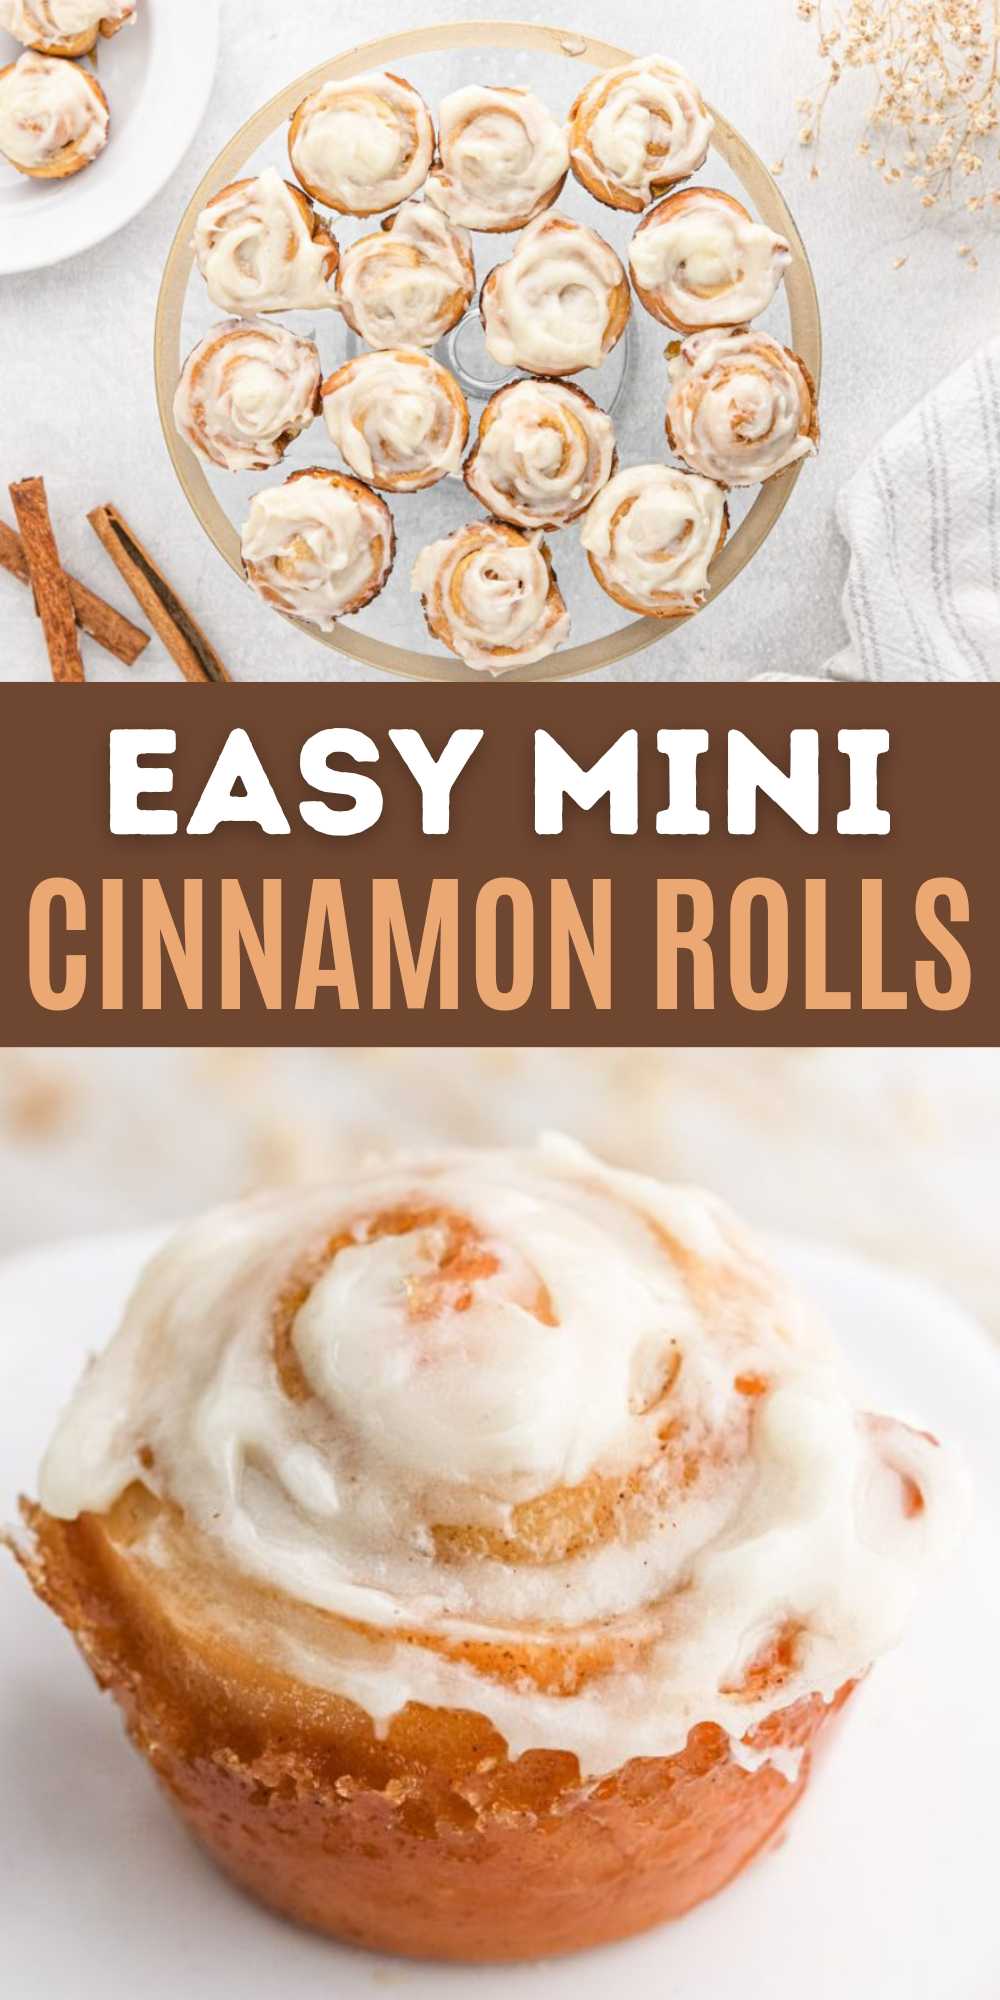 We love making Cinnamon Rolls and these Mini Cinnamon Rolls are the size. They are made from scratch and topped with a cream cheese frosting. You can't go wrong with the gooey center and the delicious frosting. The perfect cinnamon roll to make ahead of time and the fit perfectly in a mini muffin tin. #eatingonadime #minicinnamonrolls #cinnamonrolls